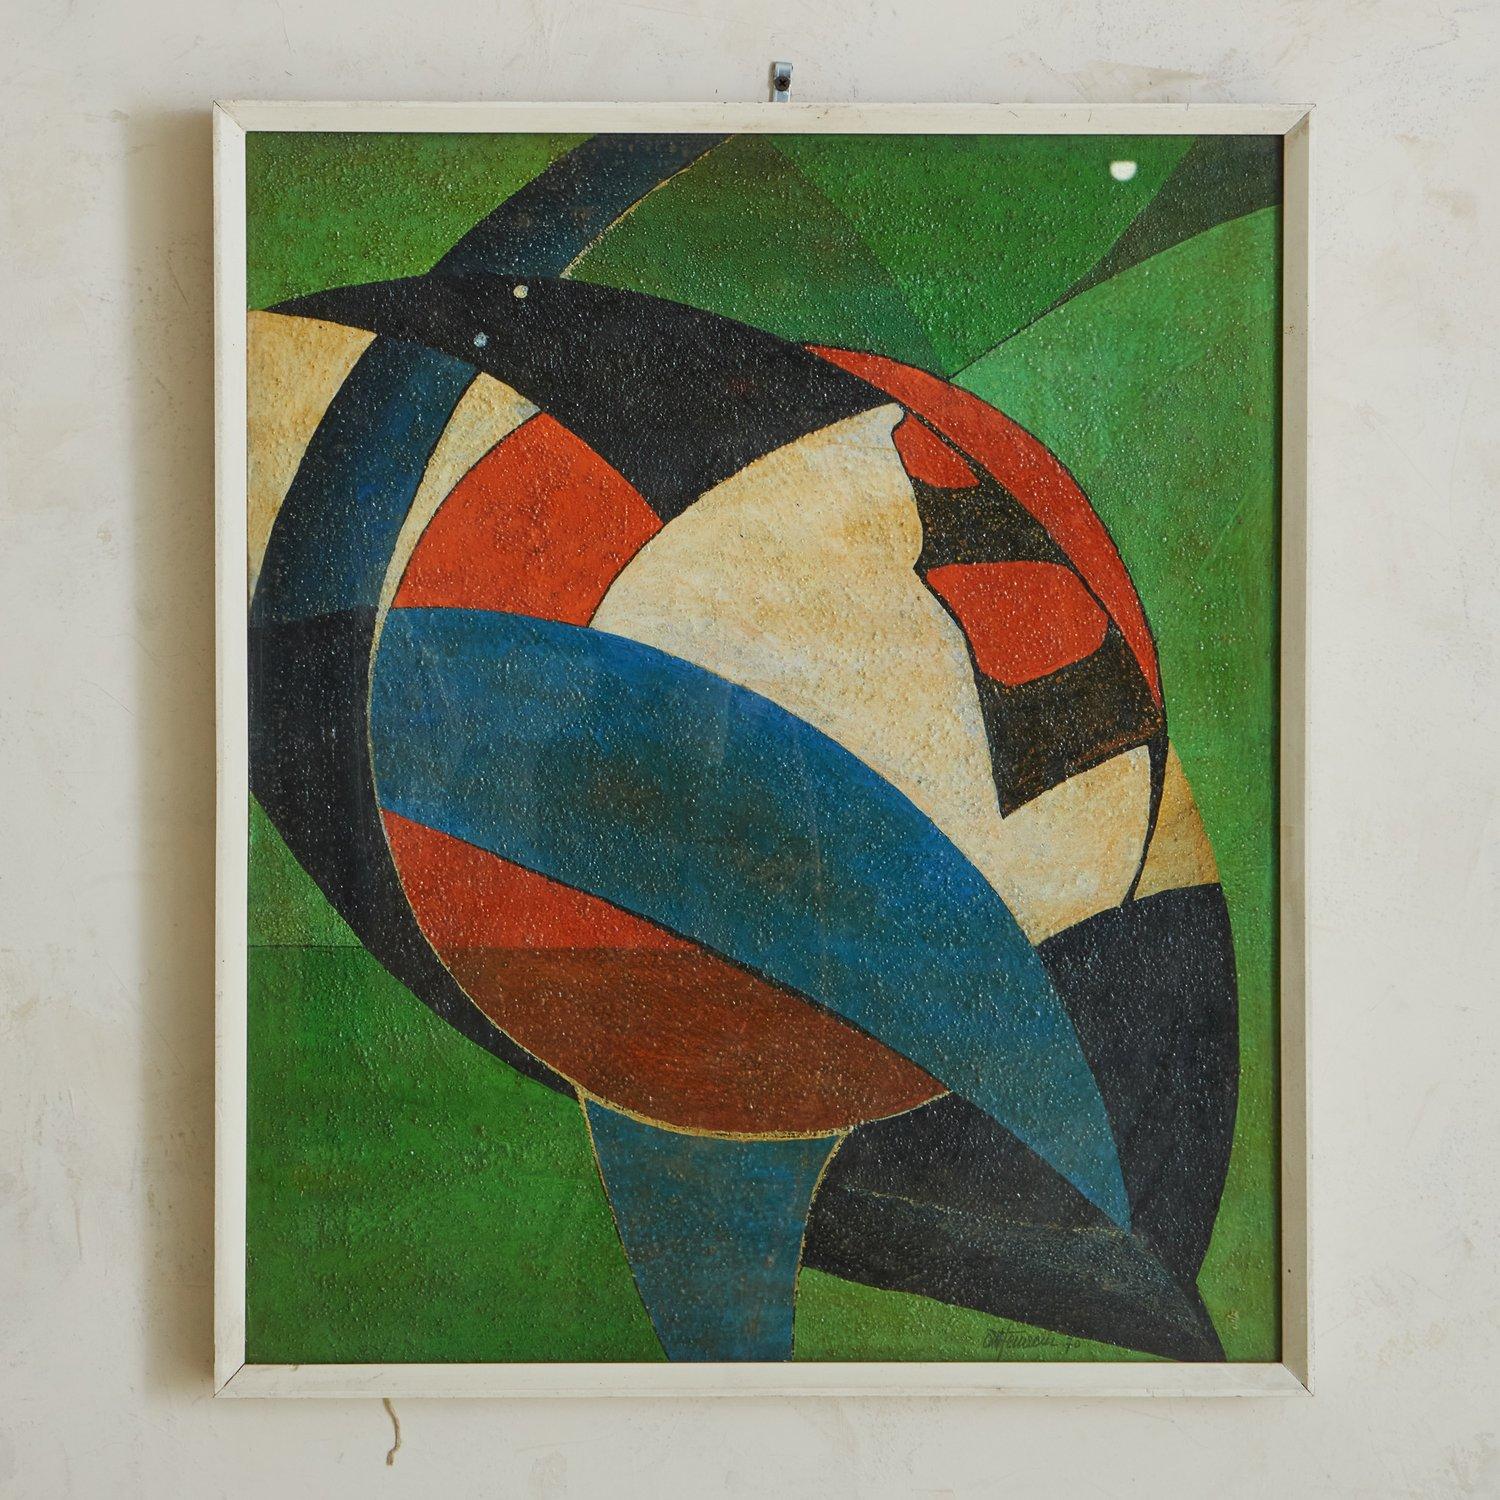 A mid century painting on canvas by Italian artist Attilio Ferracin (1912-1999) featuring deep hues of green, blue and red in an abstract design. This piece is presented in a white wood frame. Signed en verso.